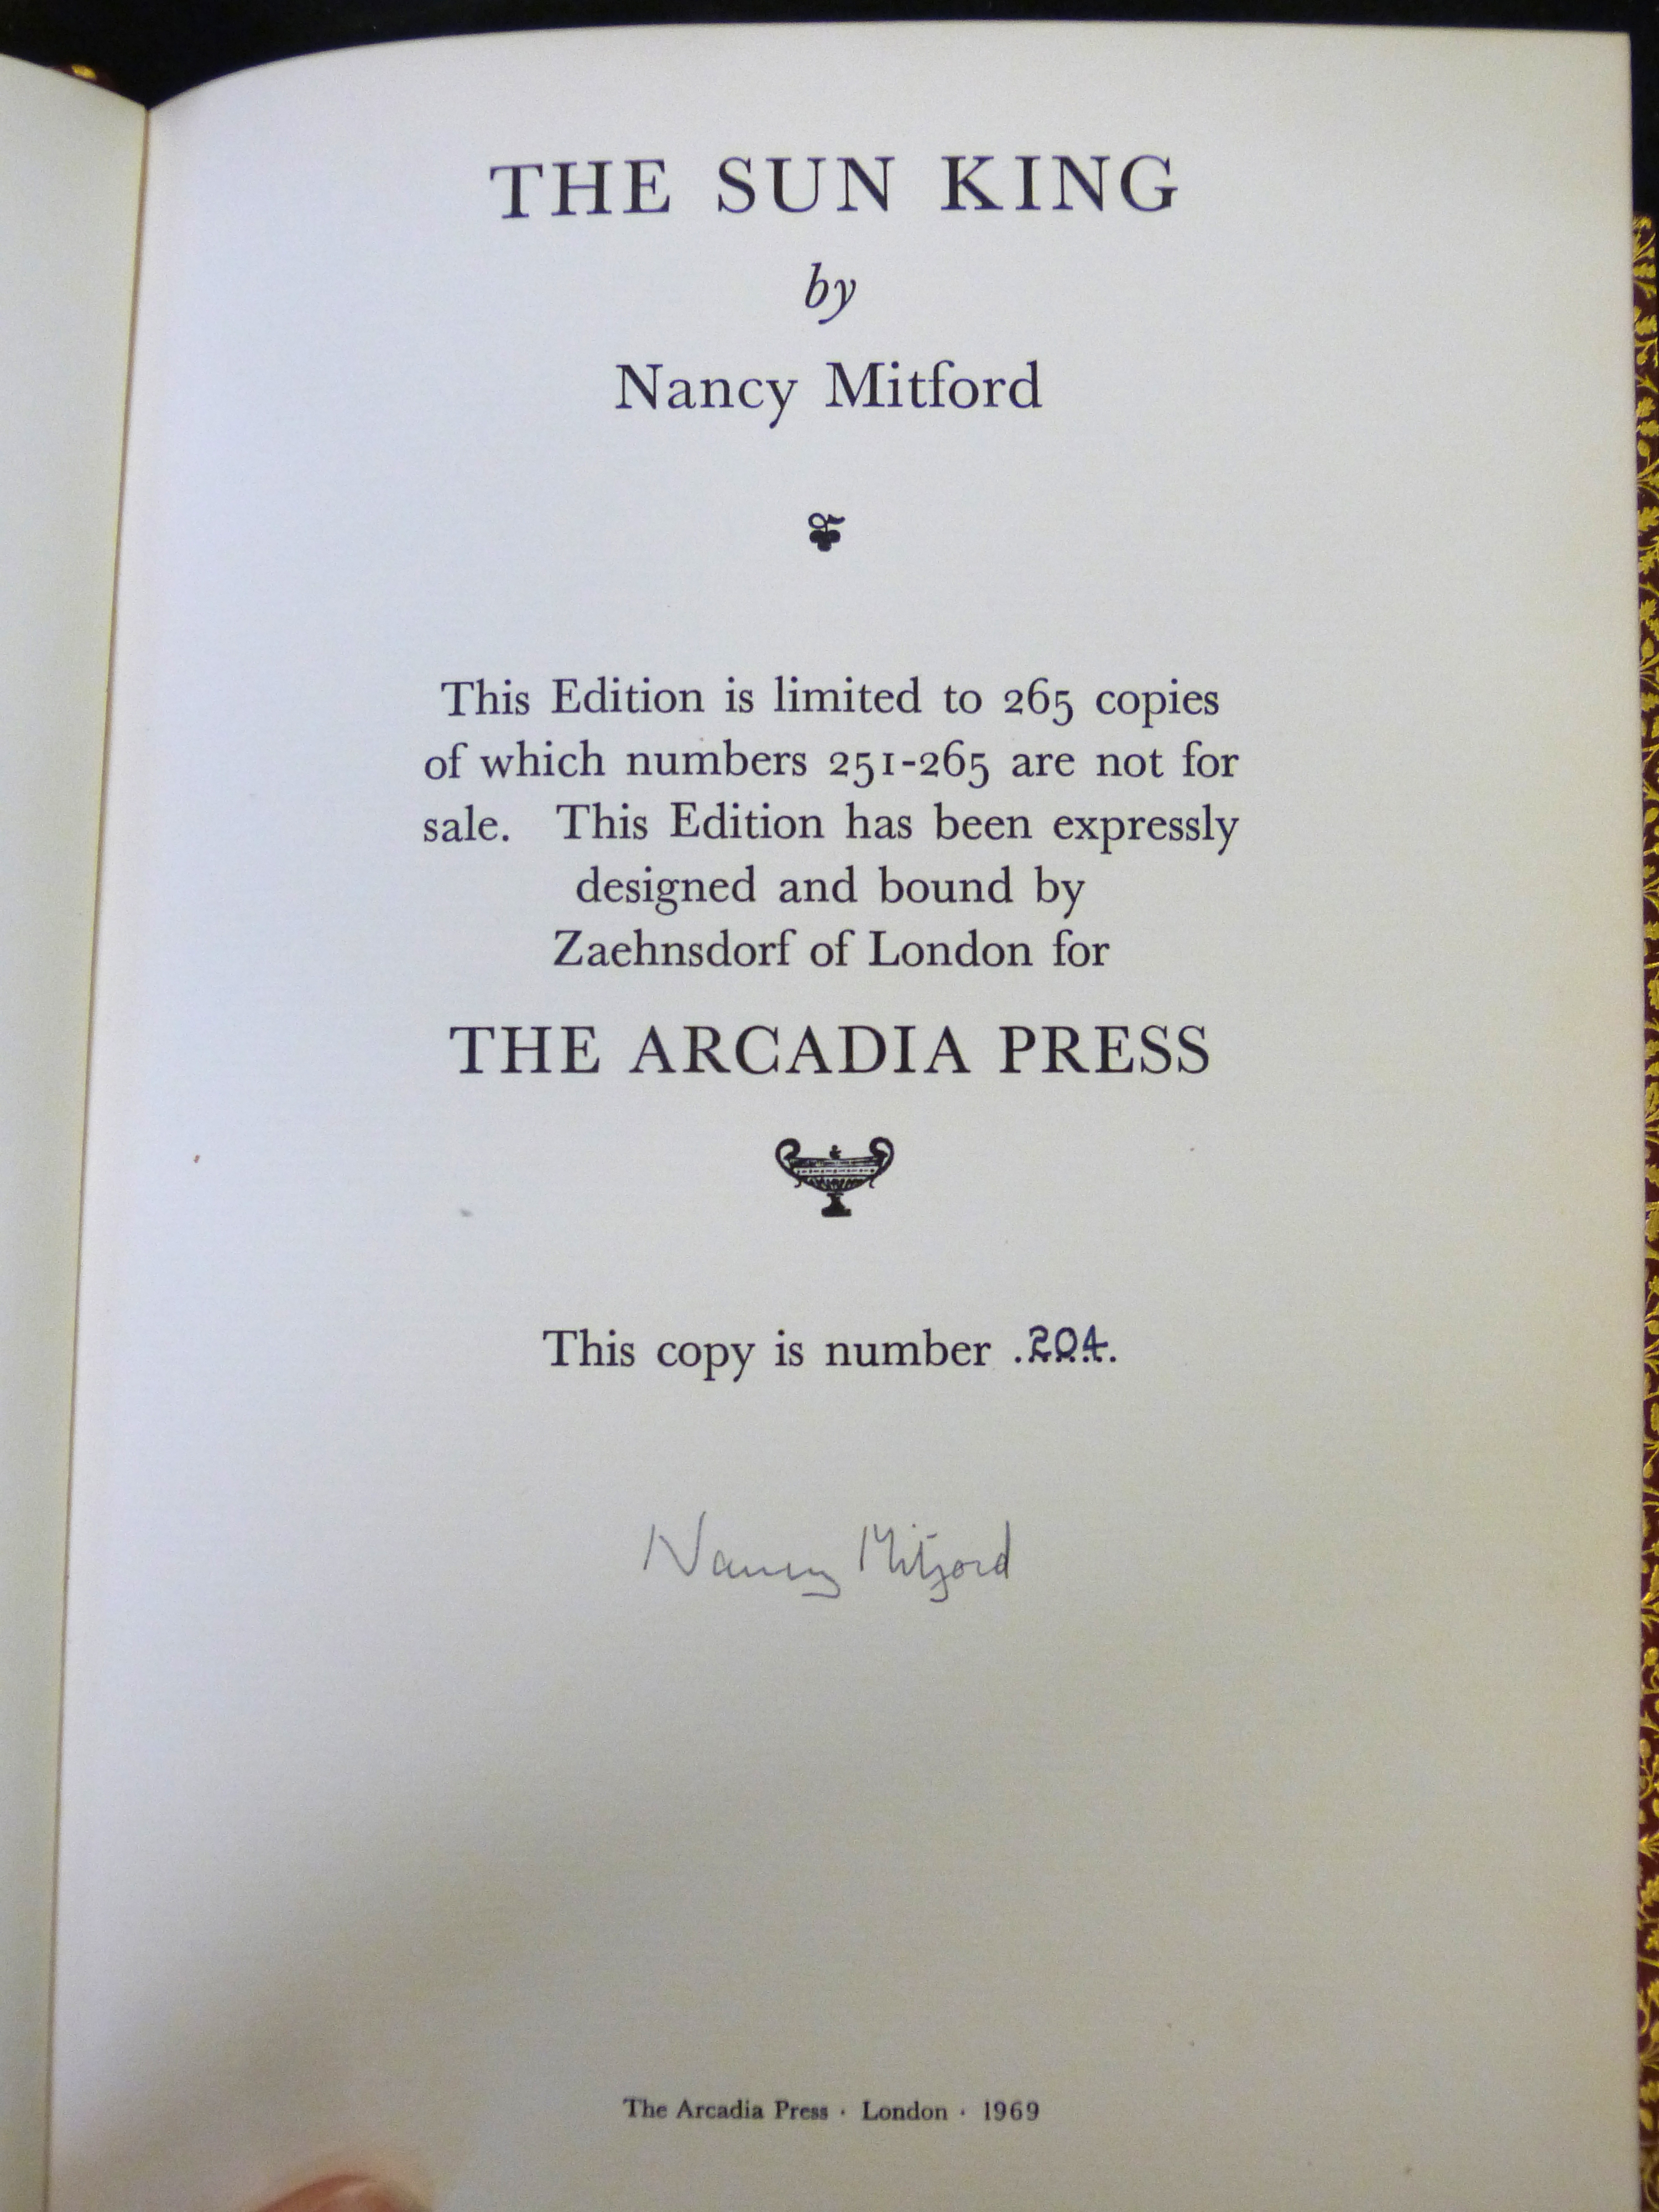 NANCY MITFORD: THE SUN KING, London, The Arcadia Press, 1969, (265) (250), numbered and signed, 4to, - Image 3 of 4